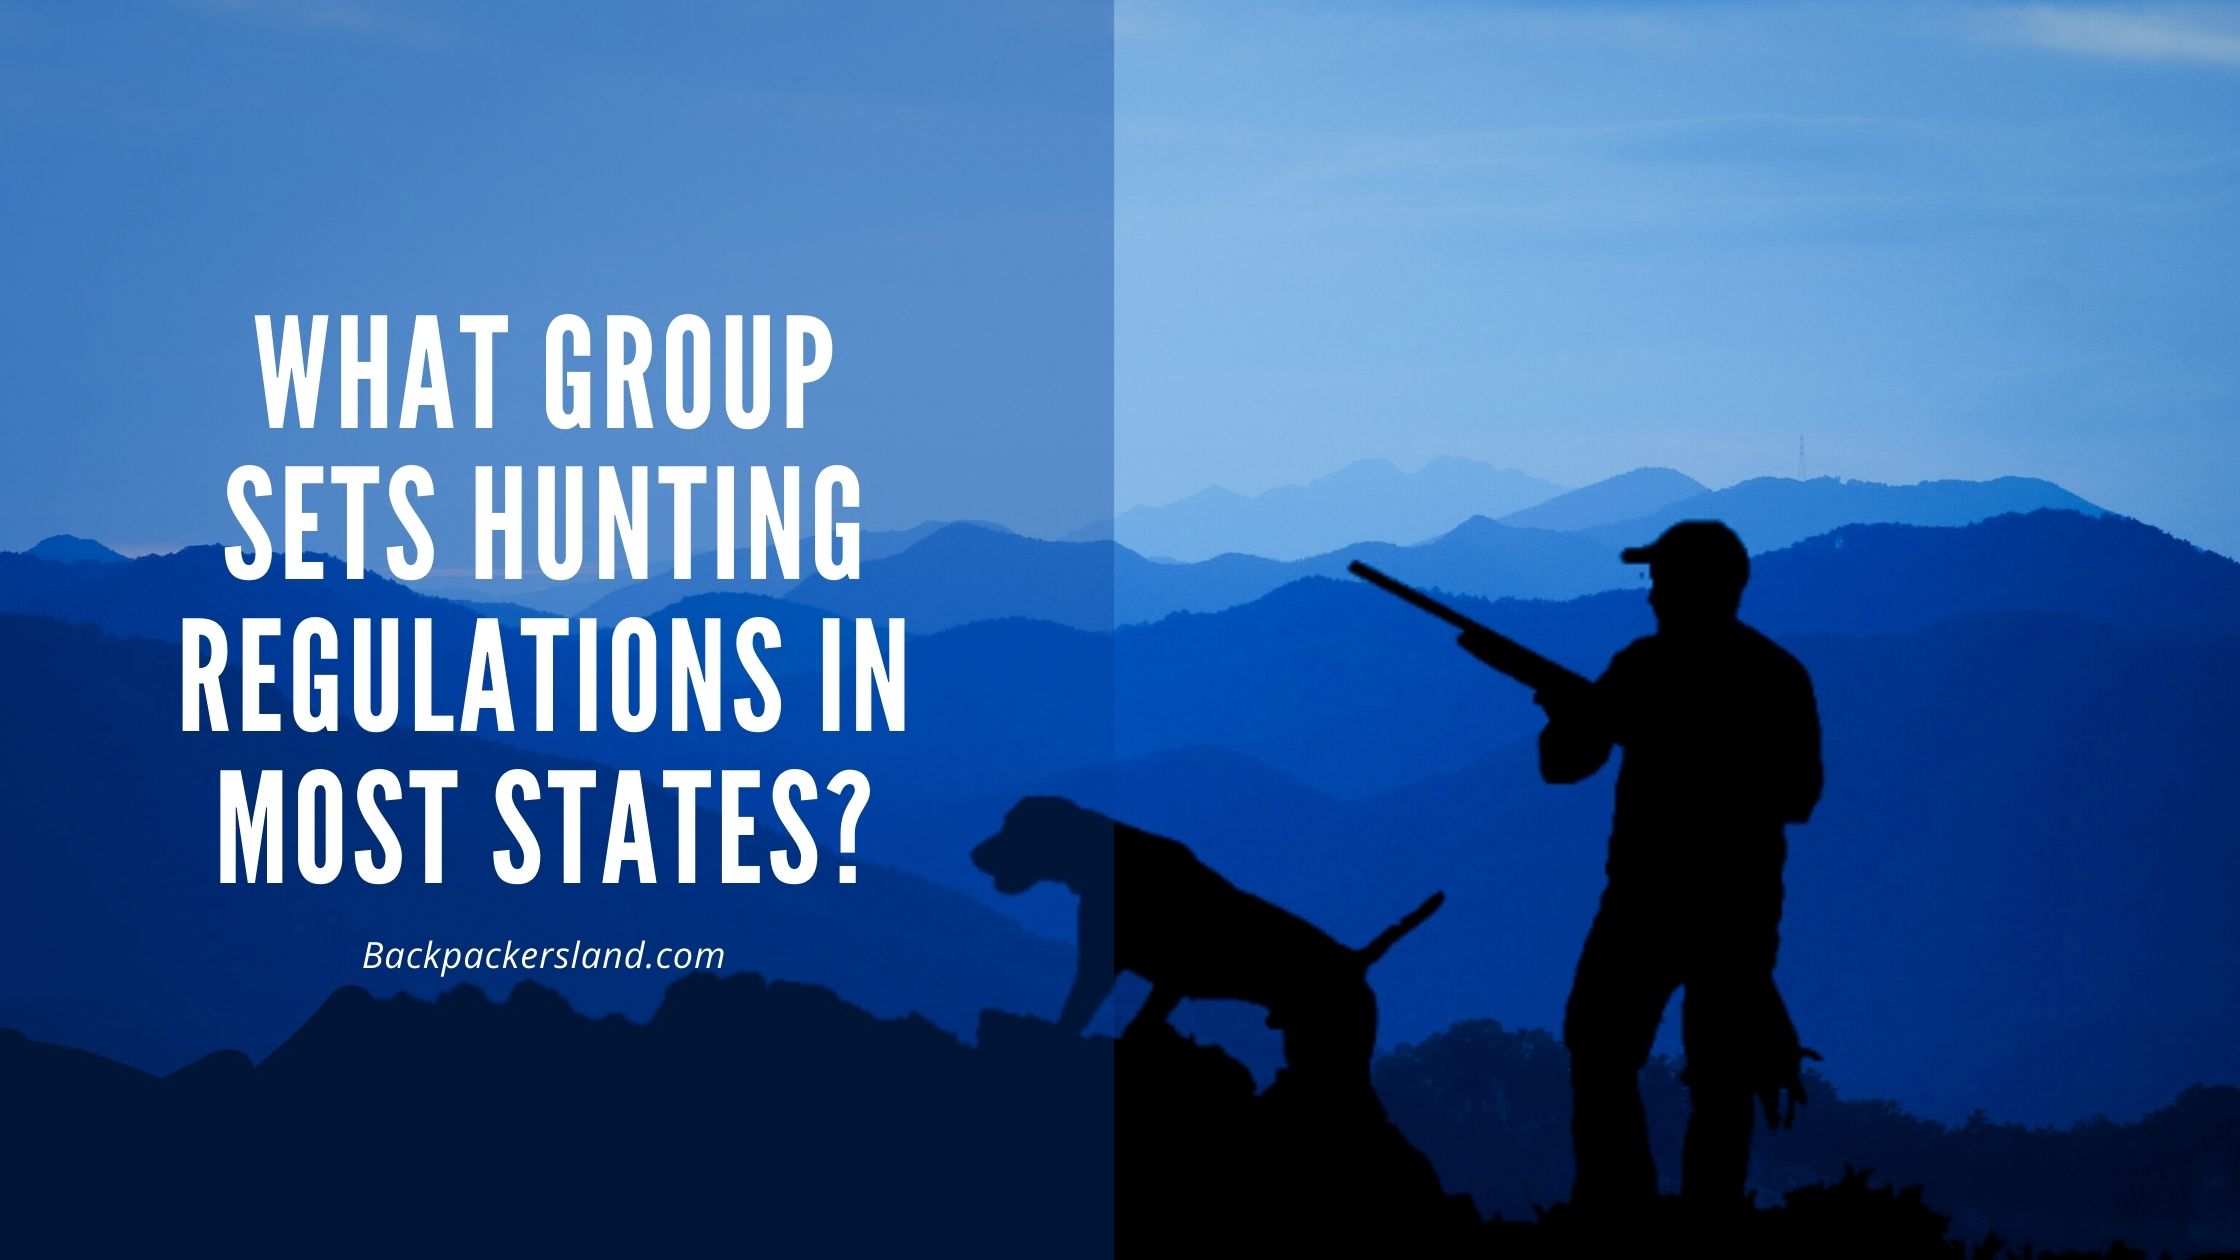 What group sets hunting regulations in most states